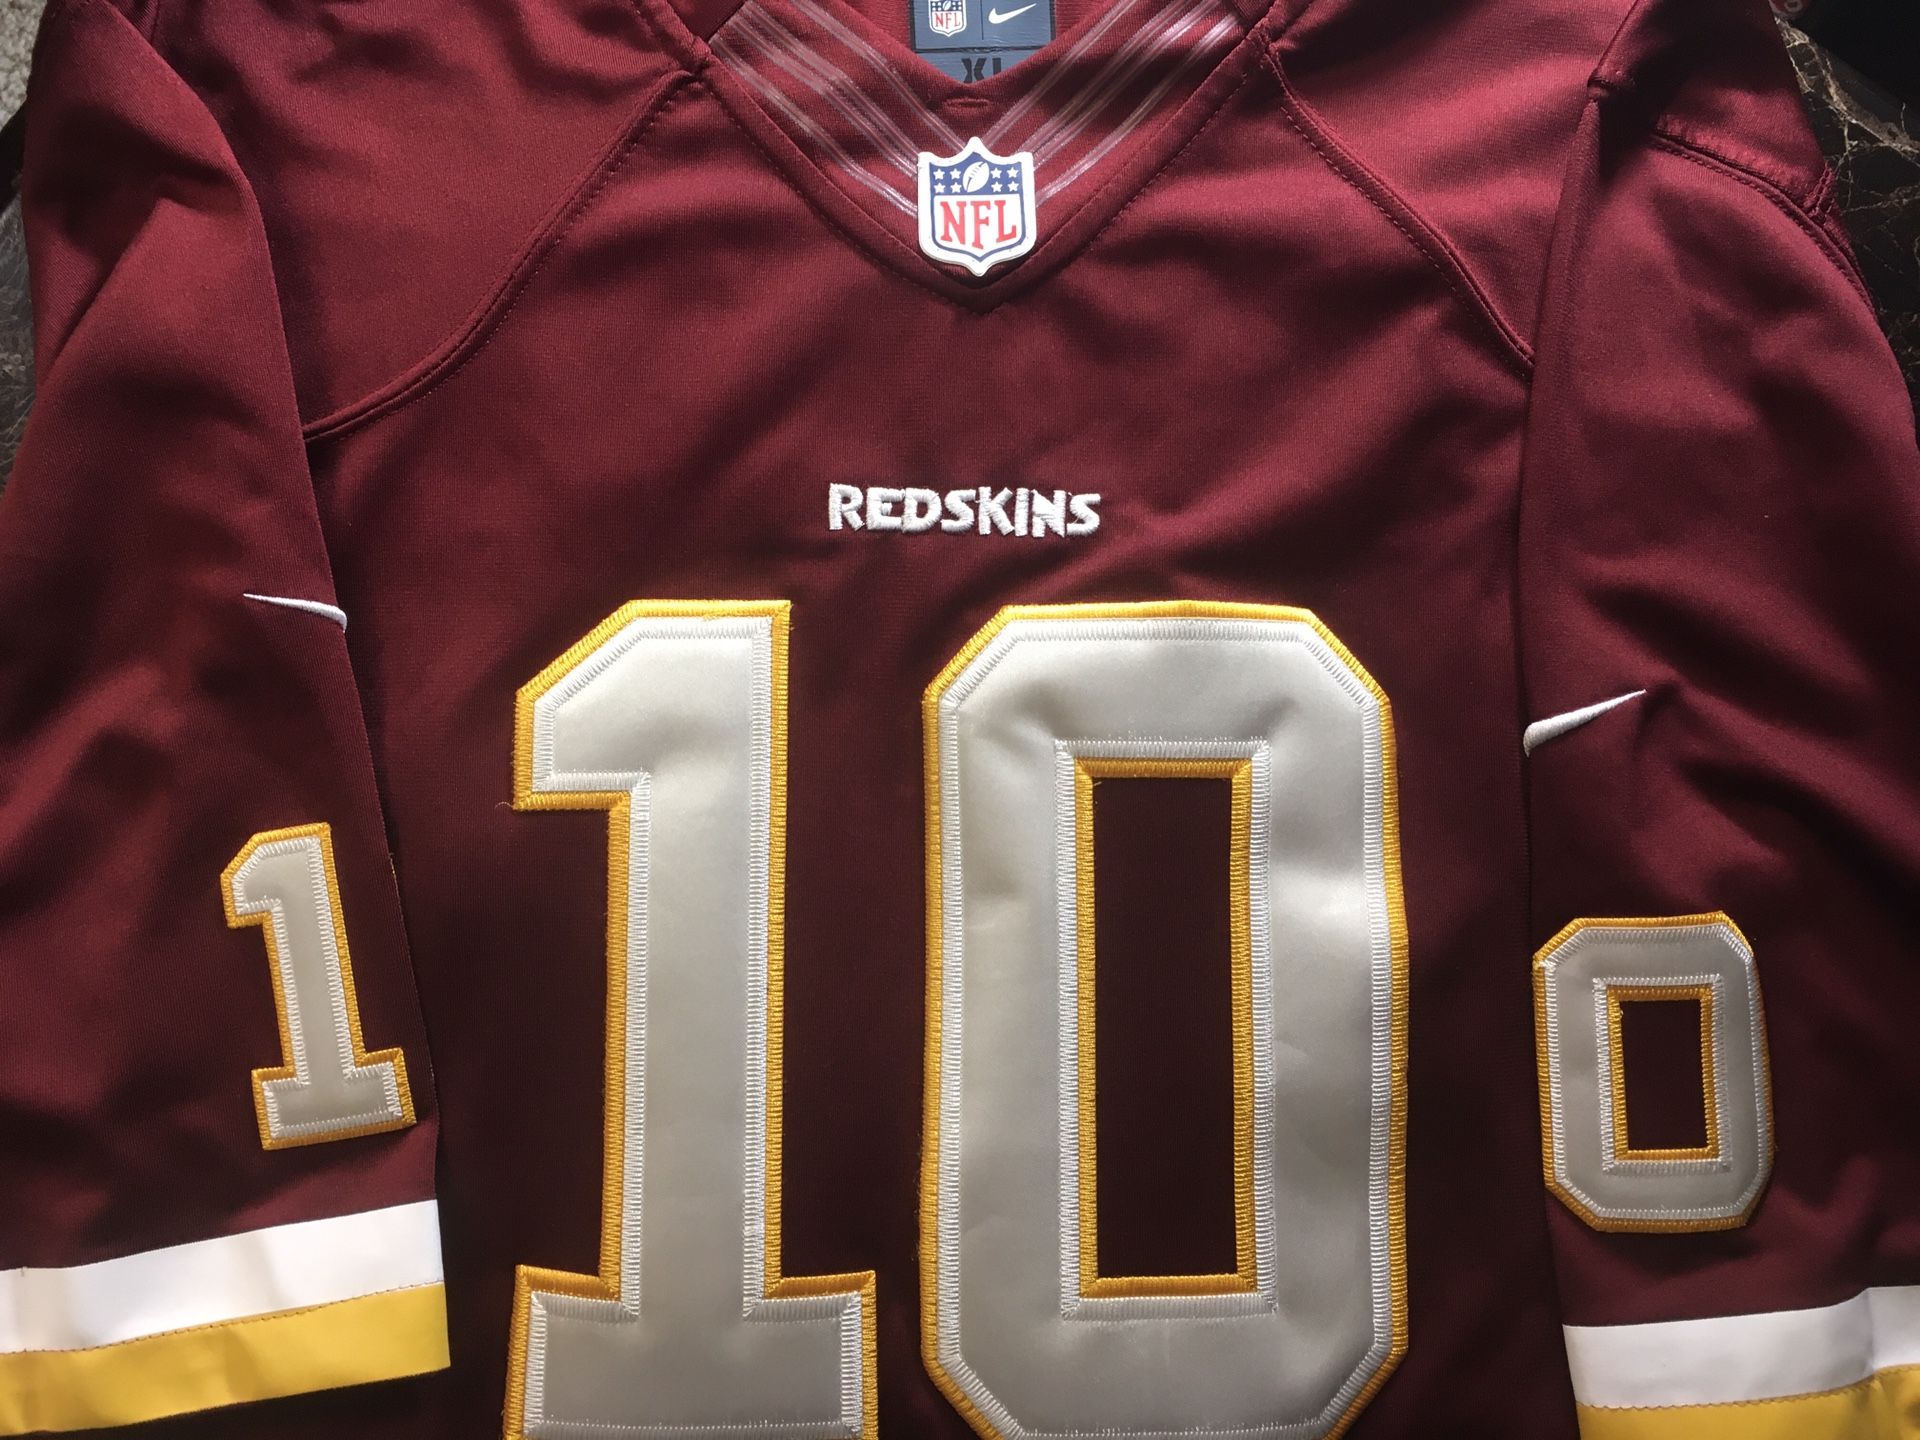 RGIII Maroon Jersey XL Sewn Nike 10 Washington Redskins On Field XL NFL Players RG3. Condition is pre-owned. No apparent rips, tears. stains. Sewn o